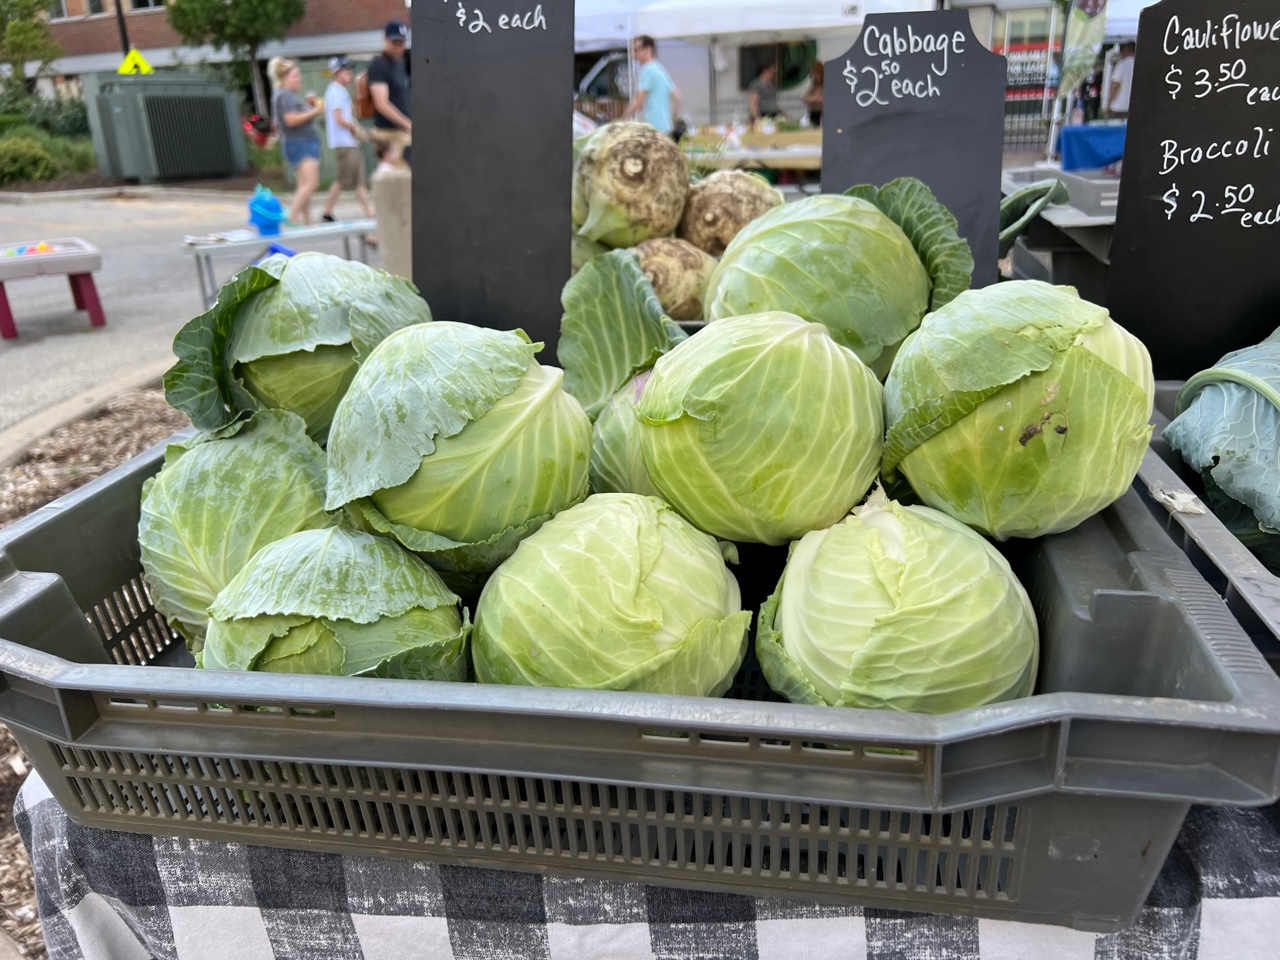 In a large gray plastic container, there are many cabbage heads for sale. Photo by Alyssa Buckley.